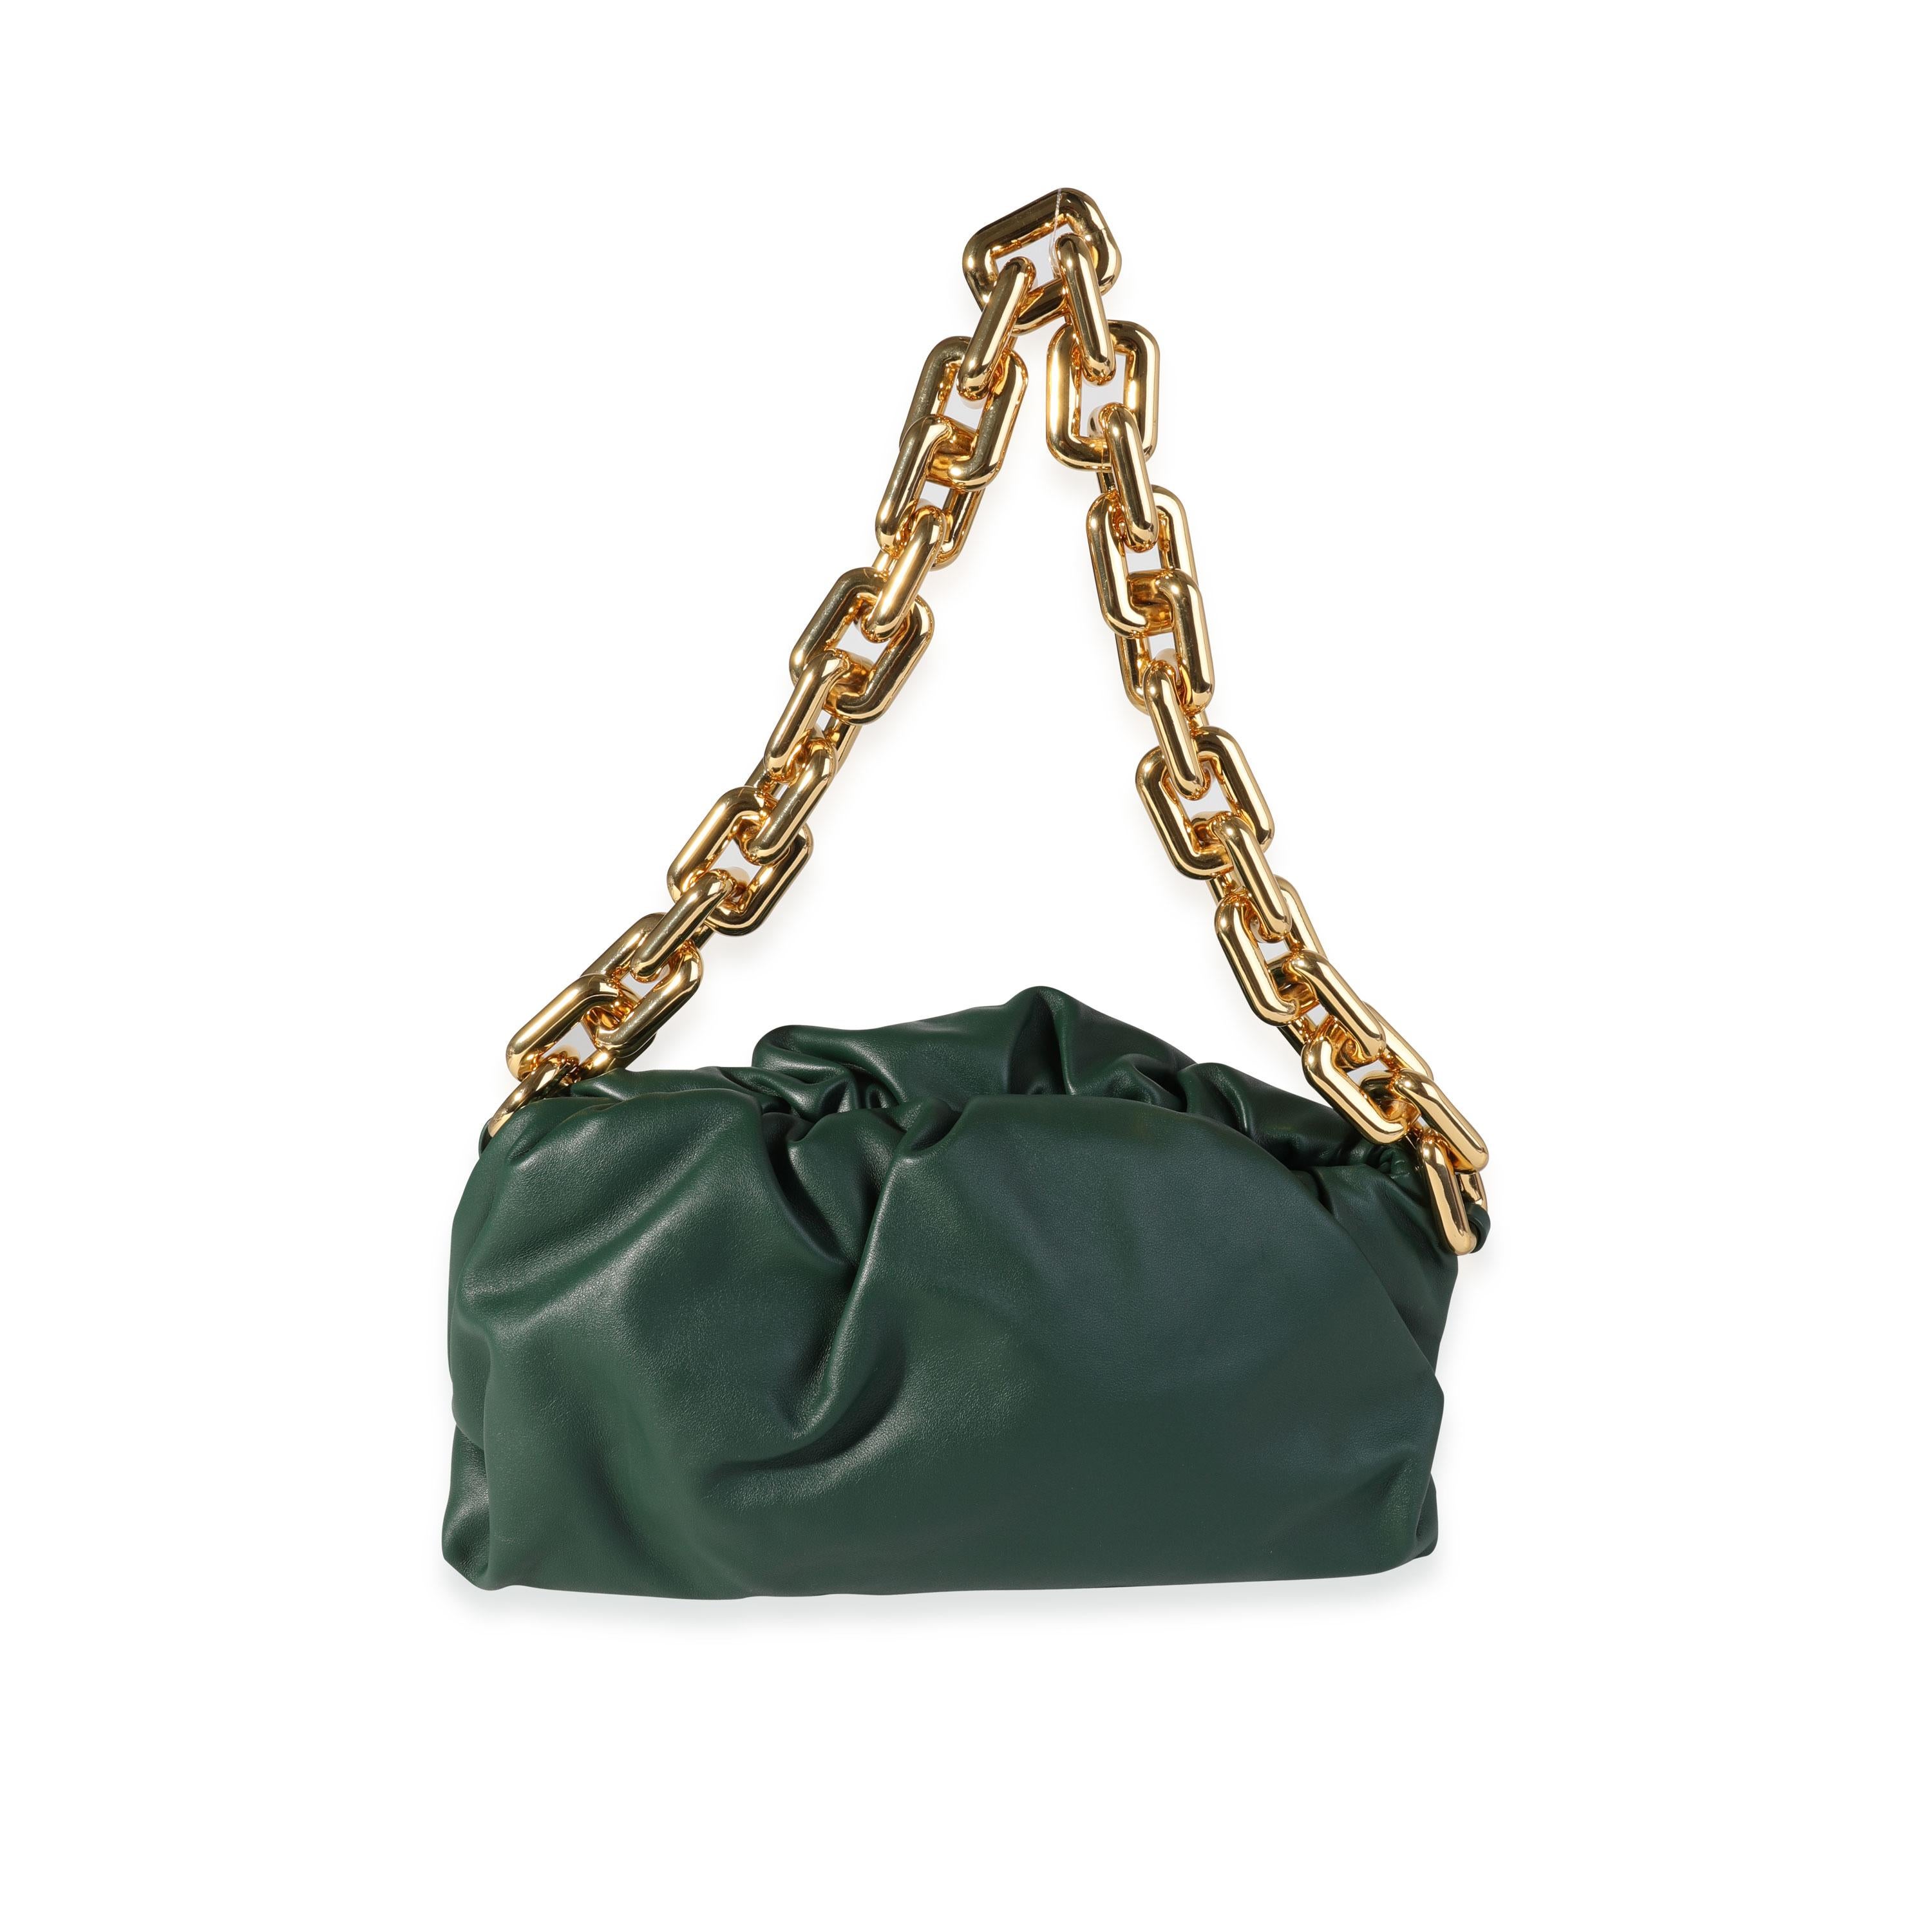 Listing Title: Bottega Veneta Raintree Calfskin Chain Pouch
SKU: 118332
MSRP: 3800.00
Condition: Pre-owned (3000)
Handbag Condition: Excellent
Condition Comments: Excellent Condition. Light scuffing to leather. No other visible signs of wear.
Brand: